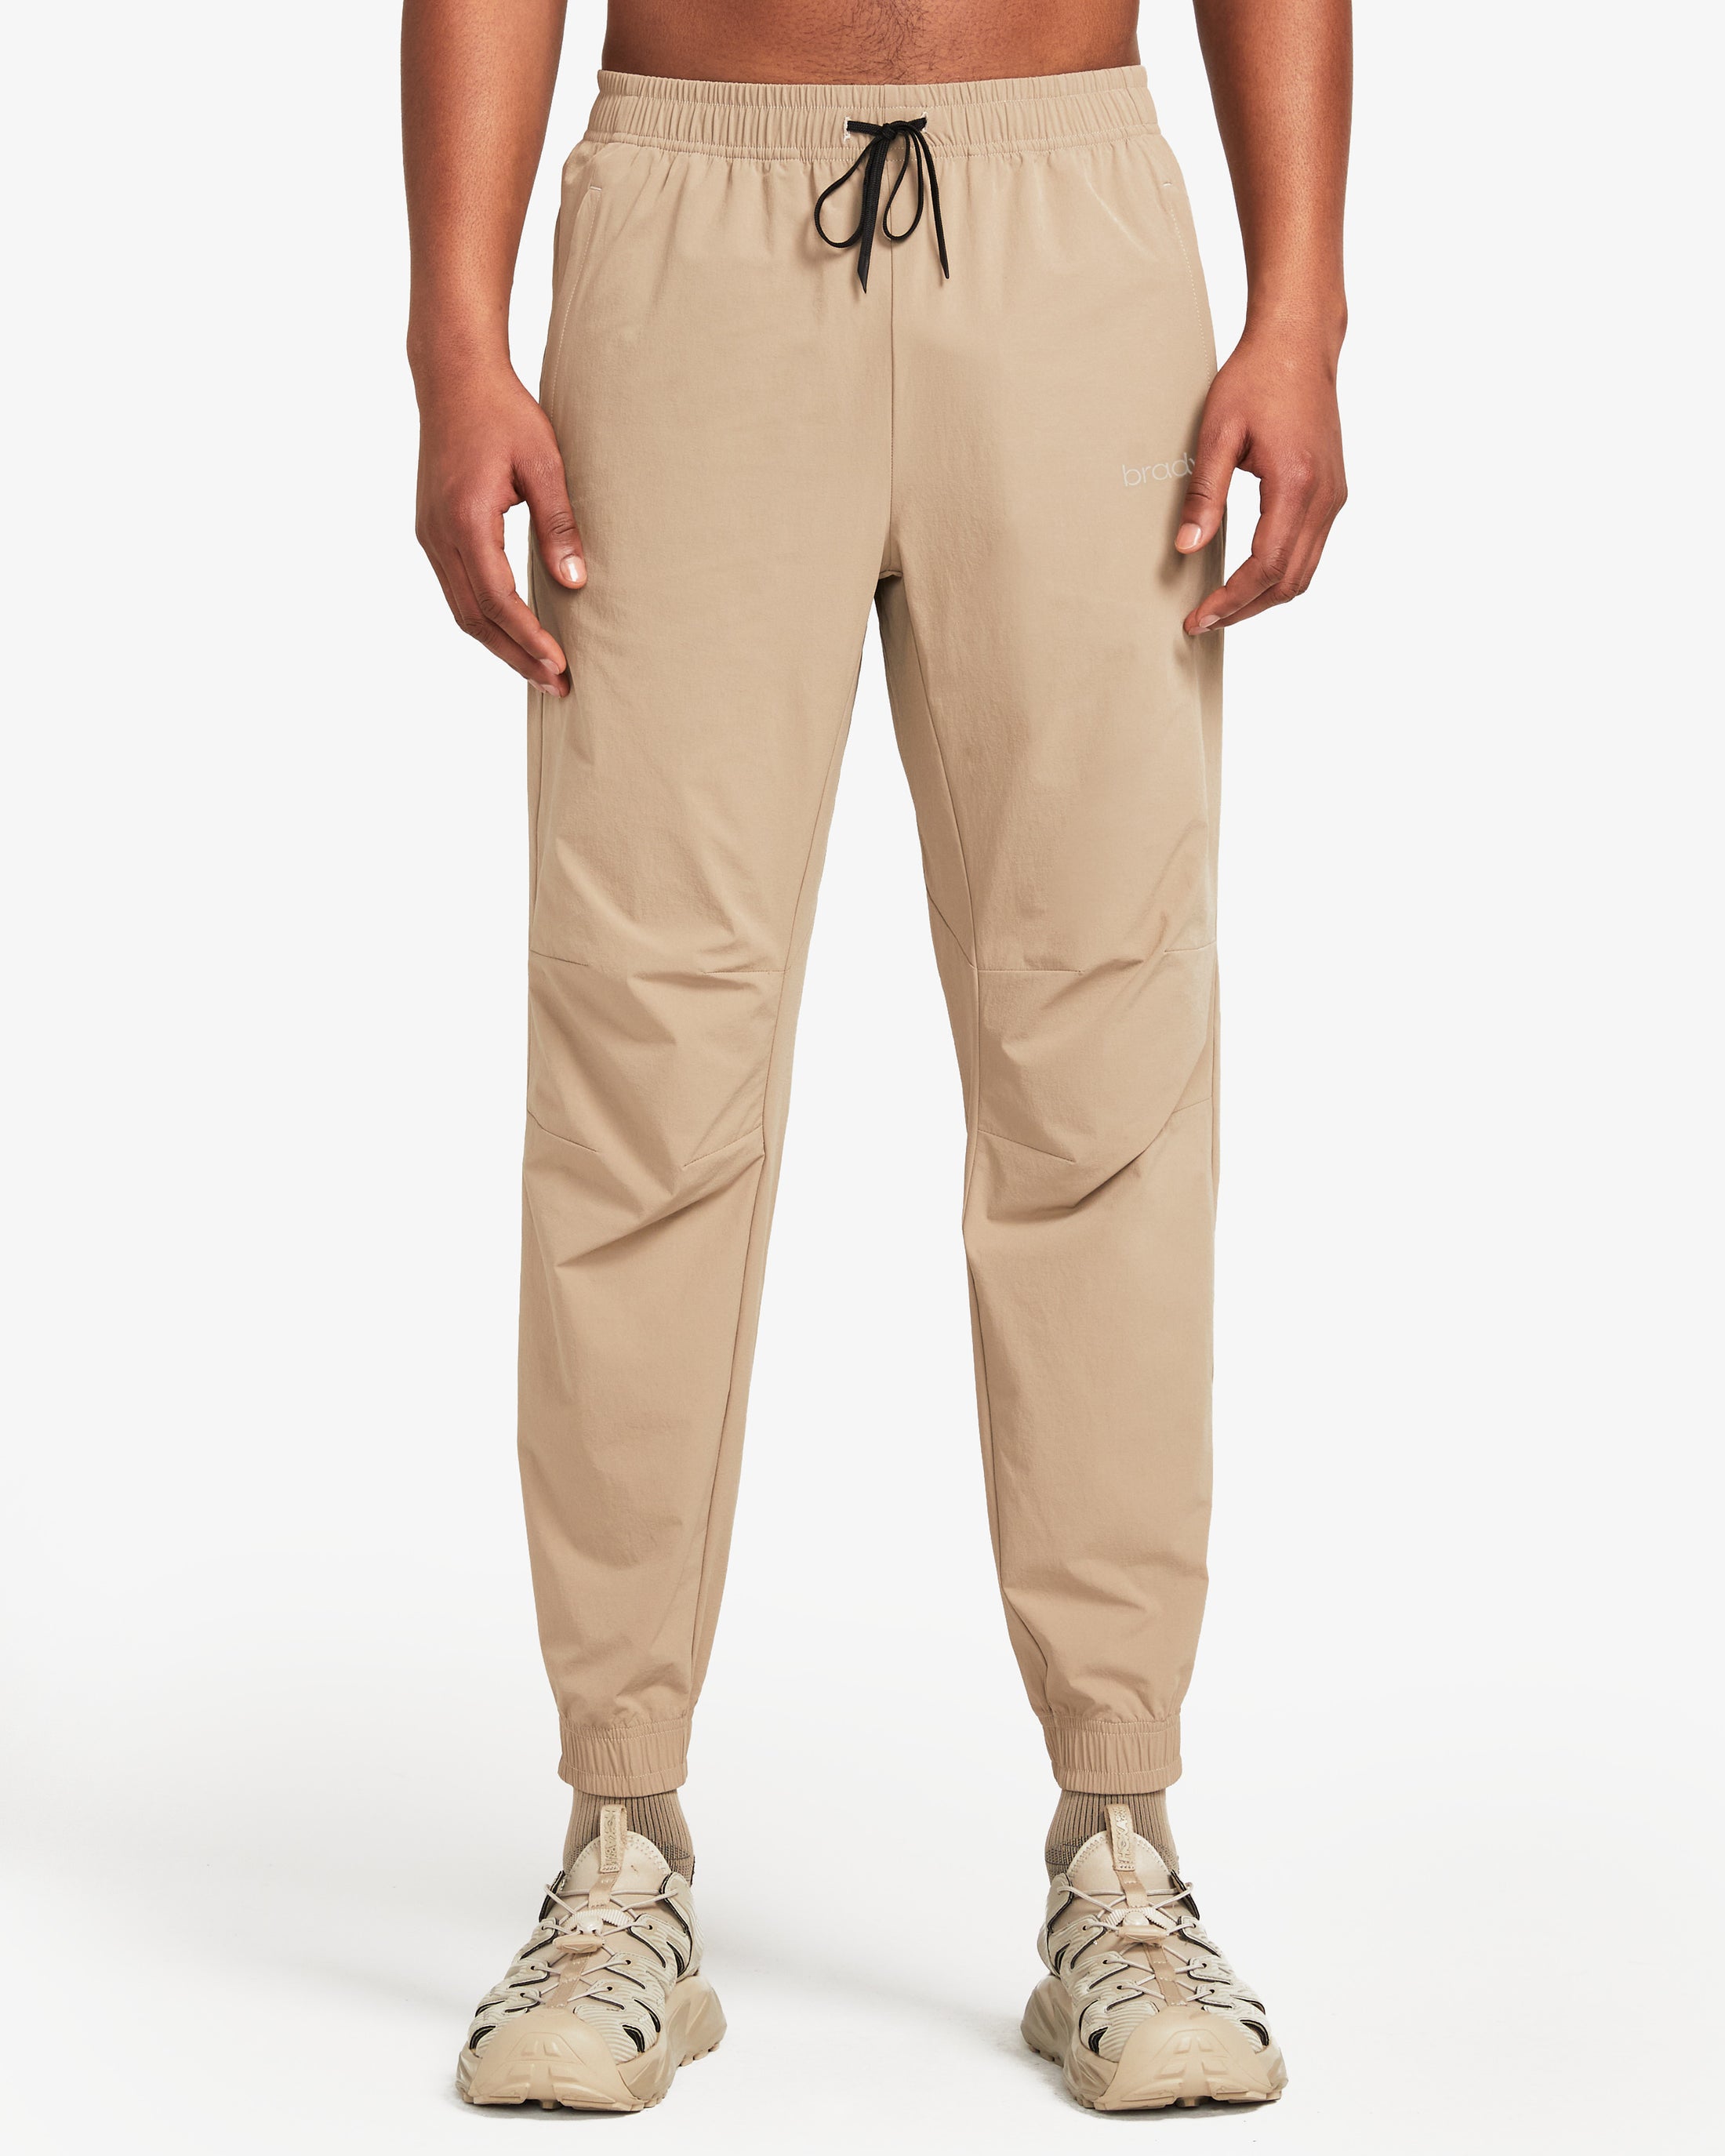 Tom Brady's Brady Brand Clothing Launches Joggers Collection: Buy Now